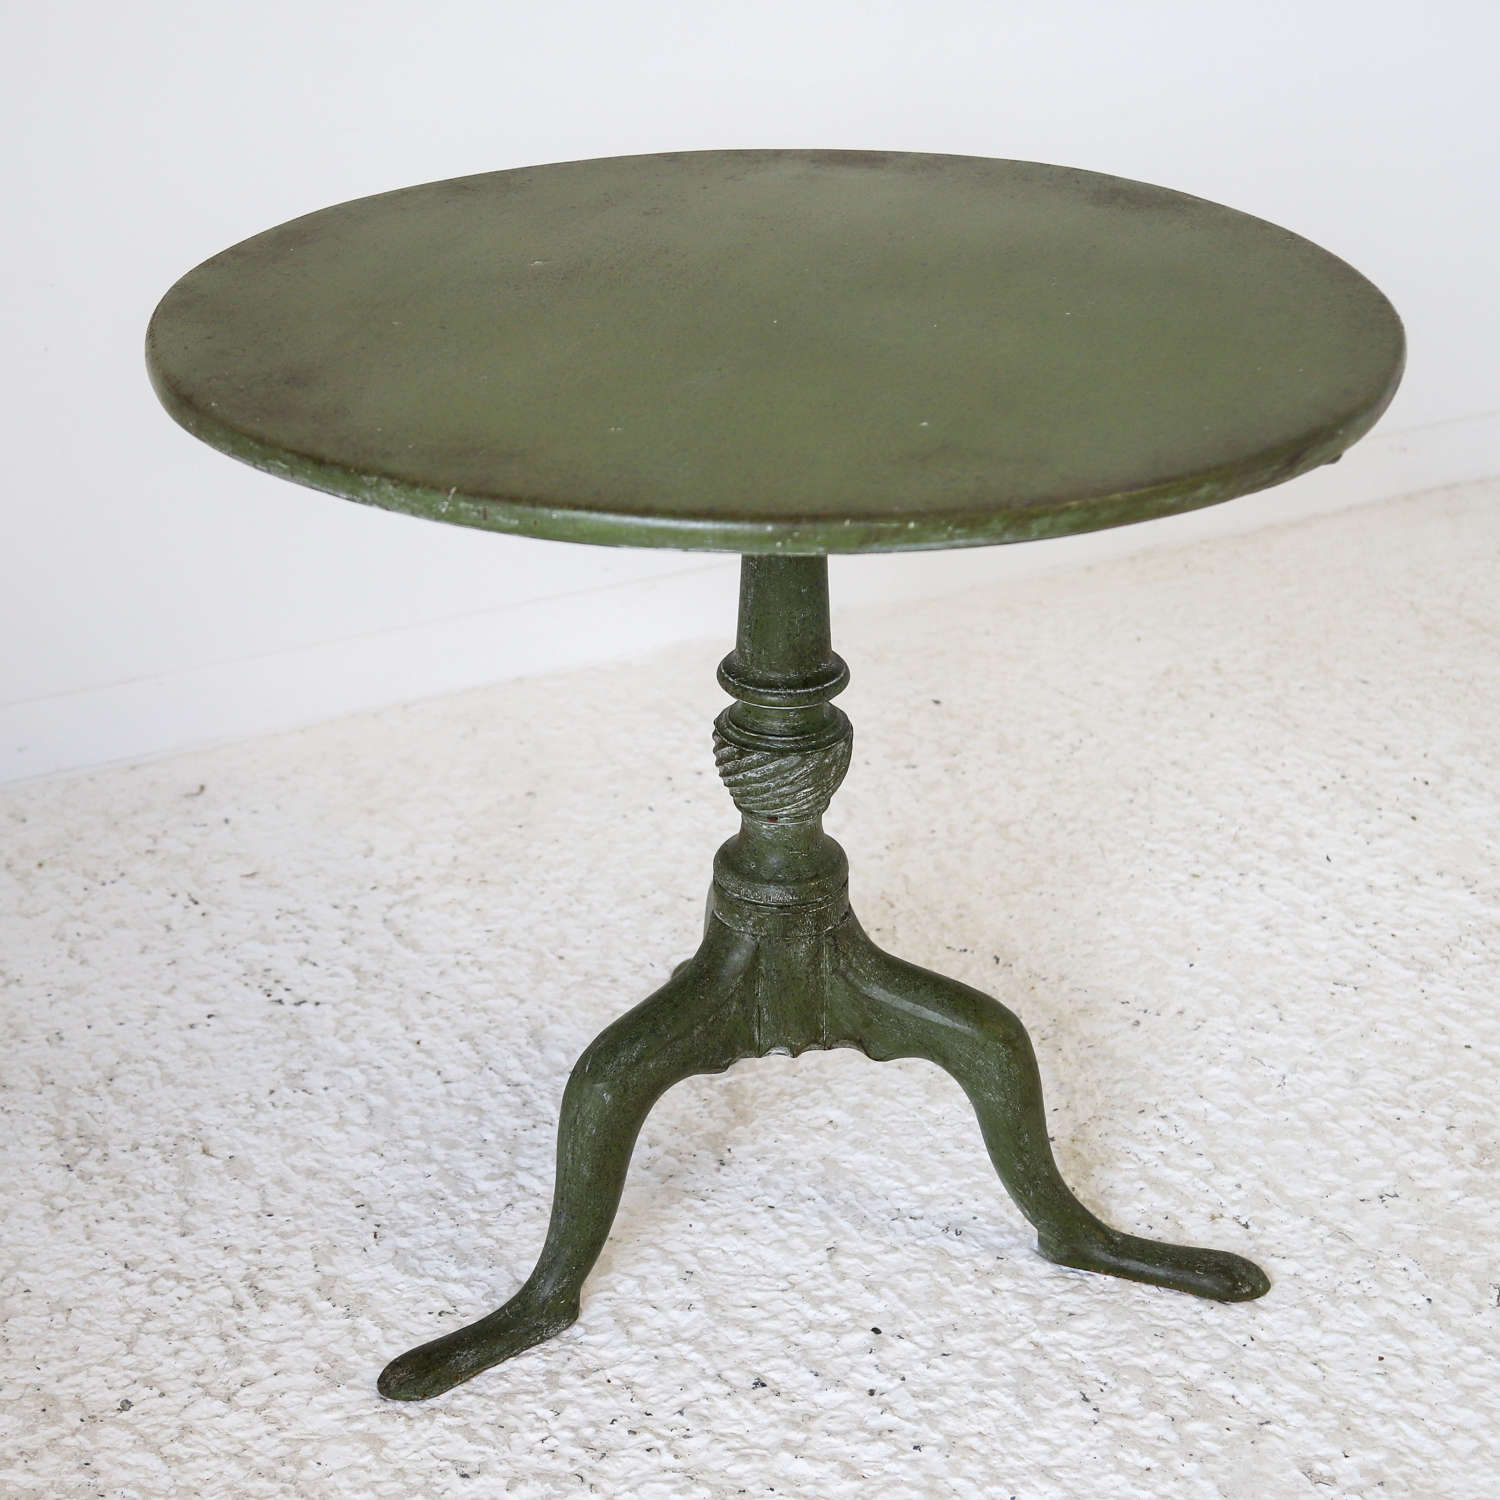 English Georgian Period Provincial Tripod Table with later paint